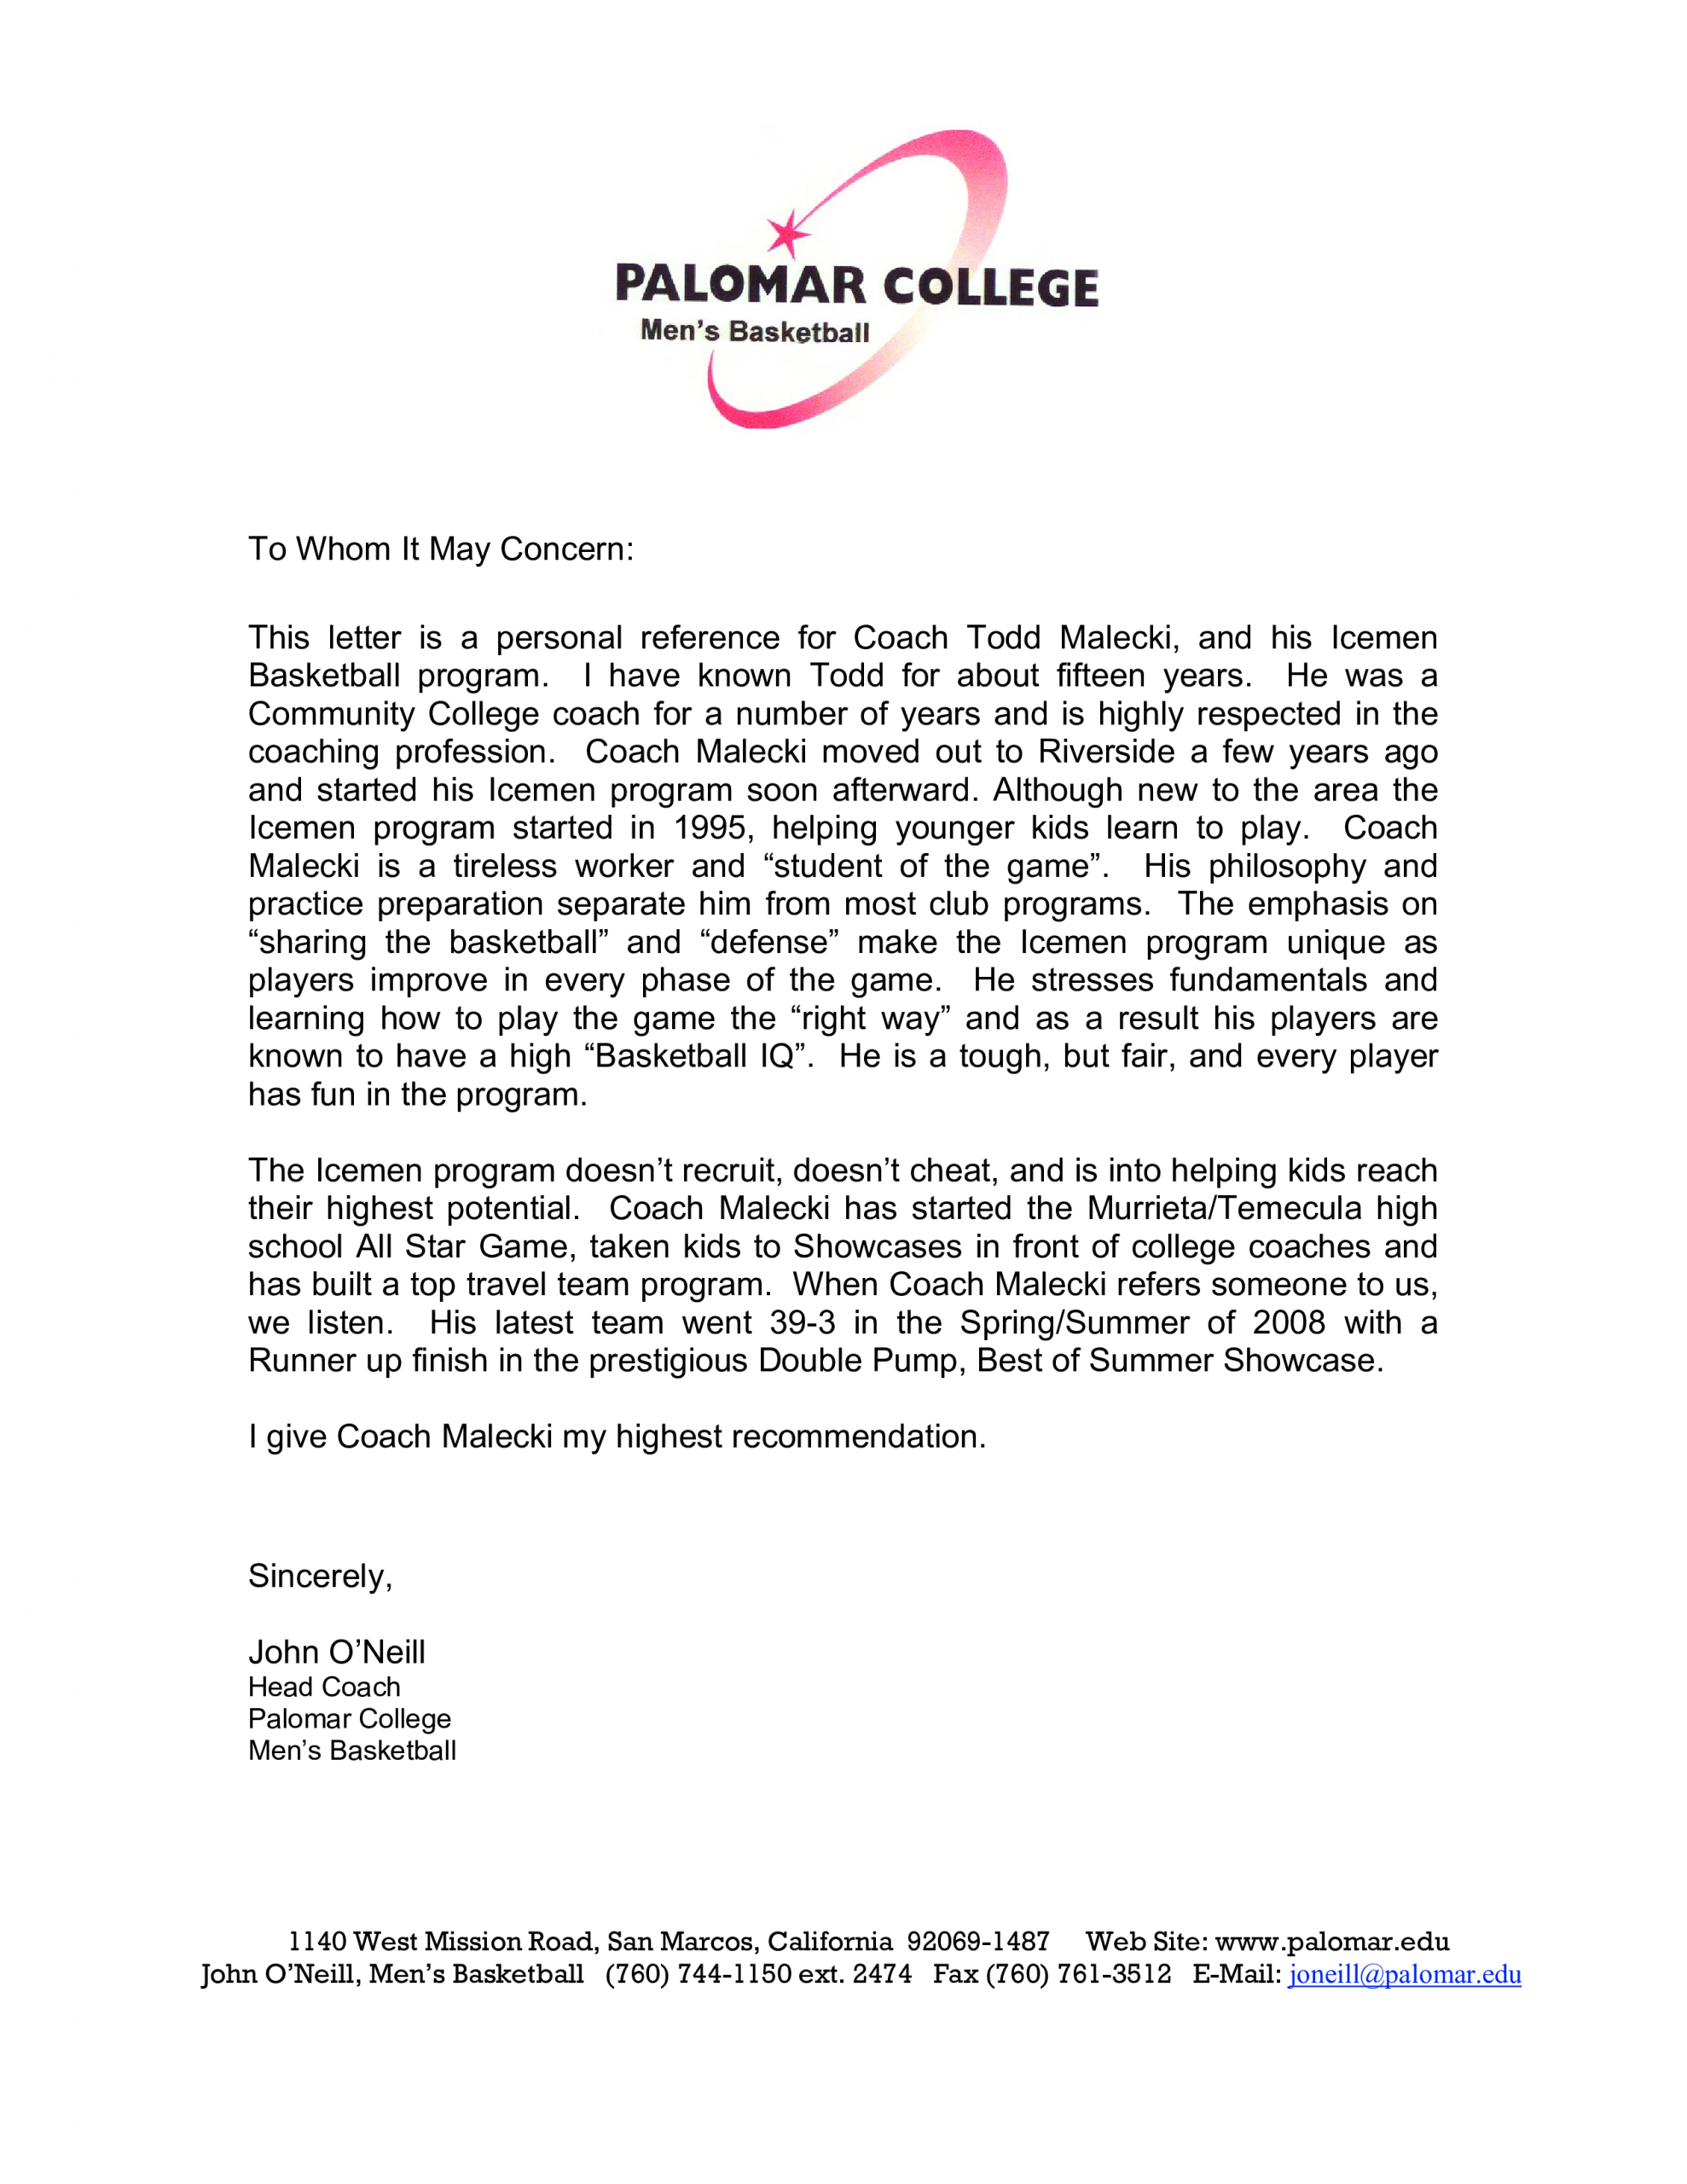 College Letter Of Recommendation From Coach Debandje pertaining to dimensions 2550 X 3300